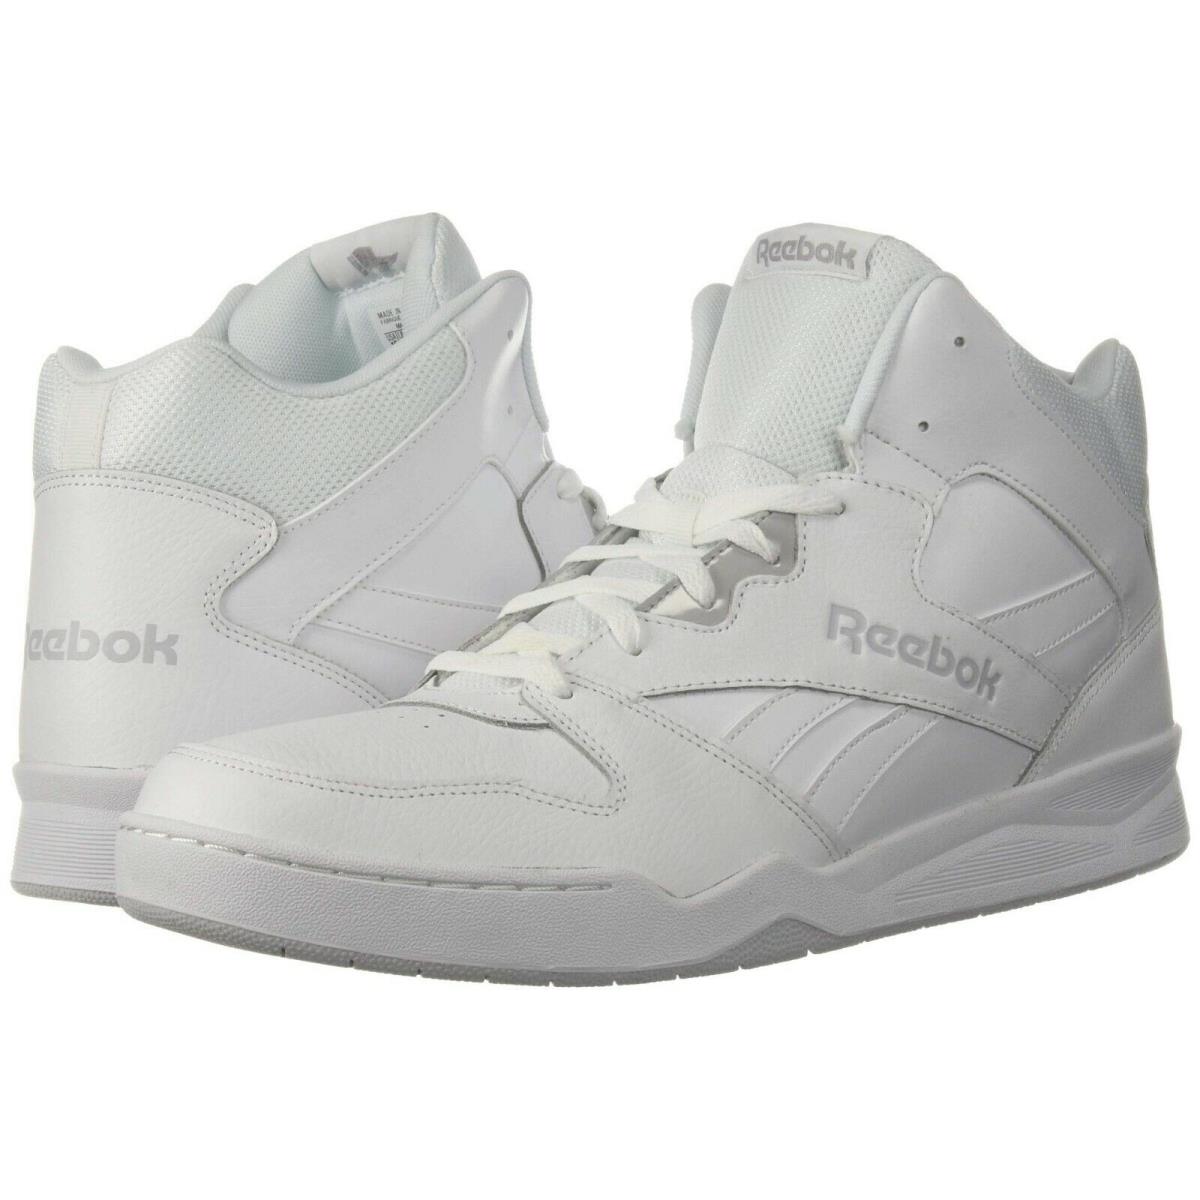 Reebok High-top Basketball Leather Shoes Motion Control Shoe Ankle Sneakers White